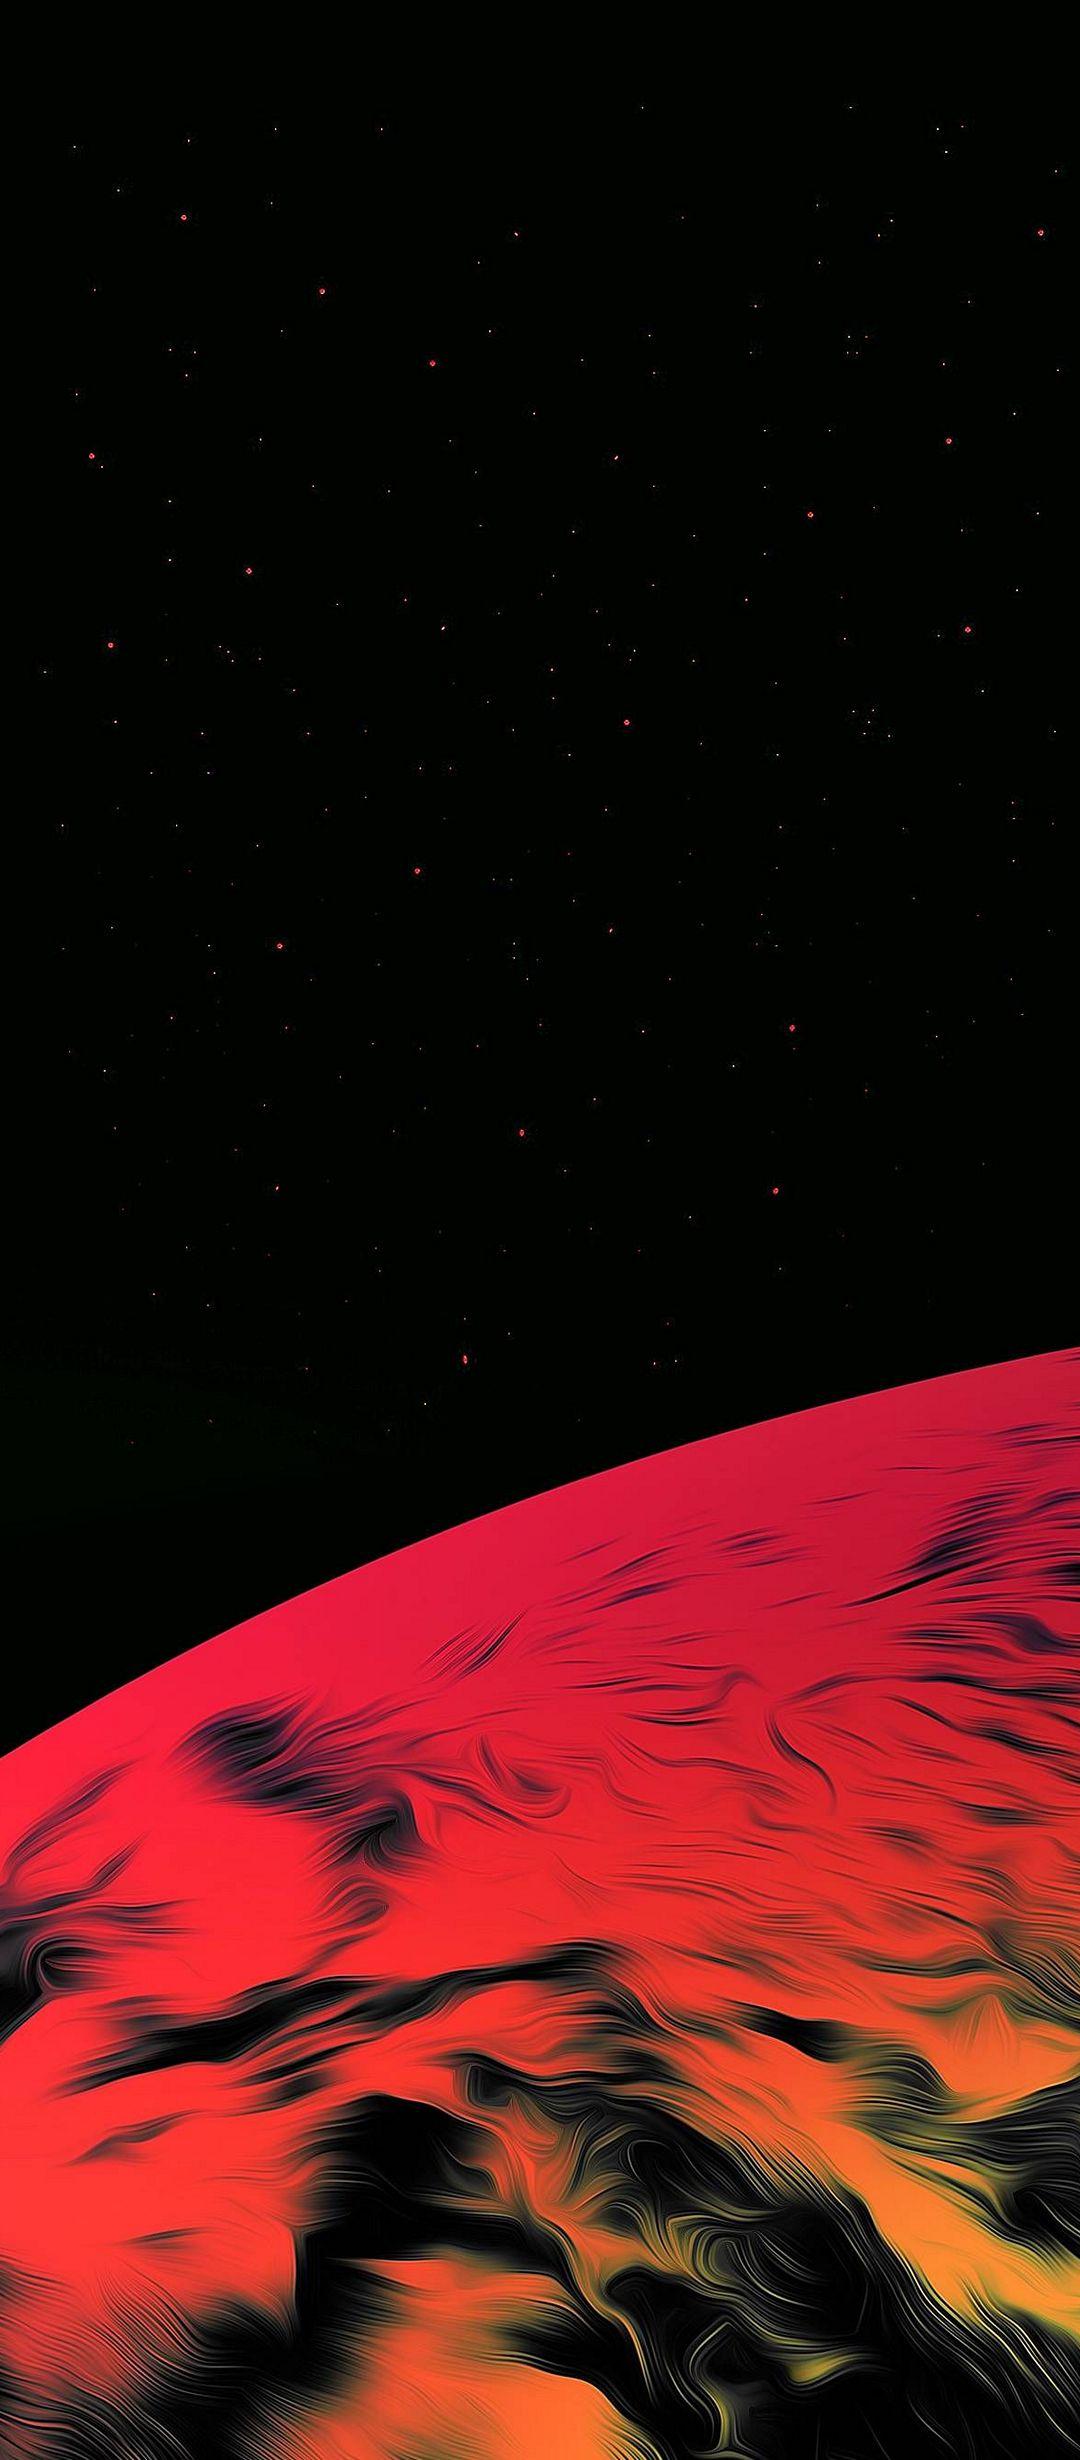 Red Planet Space